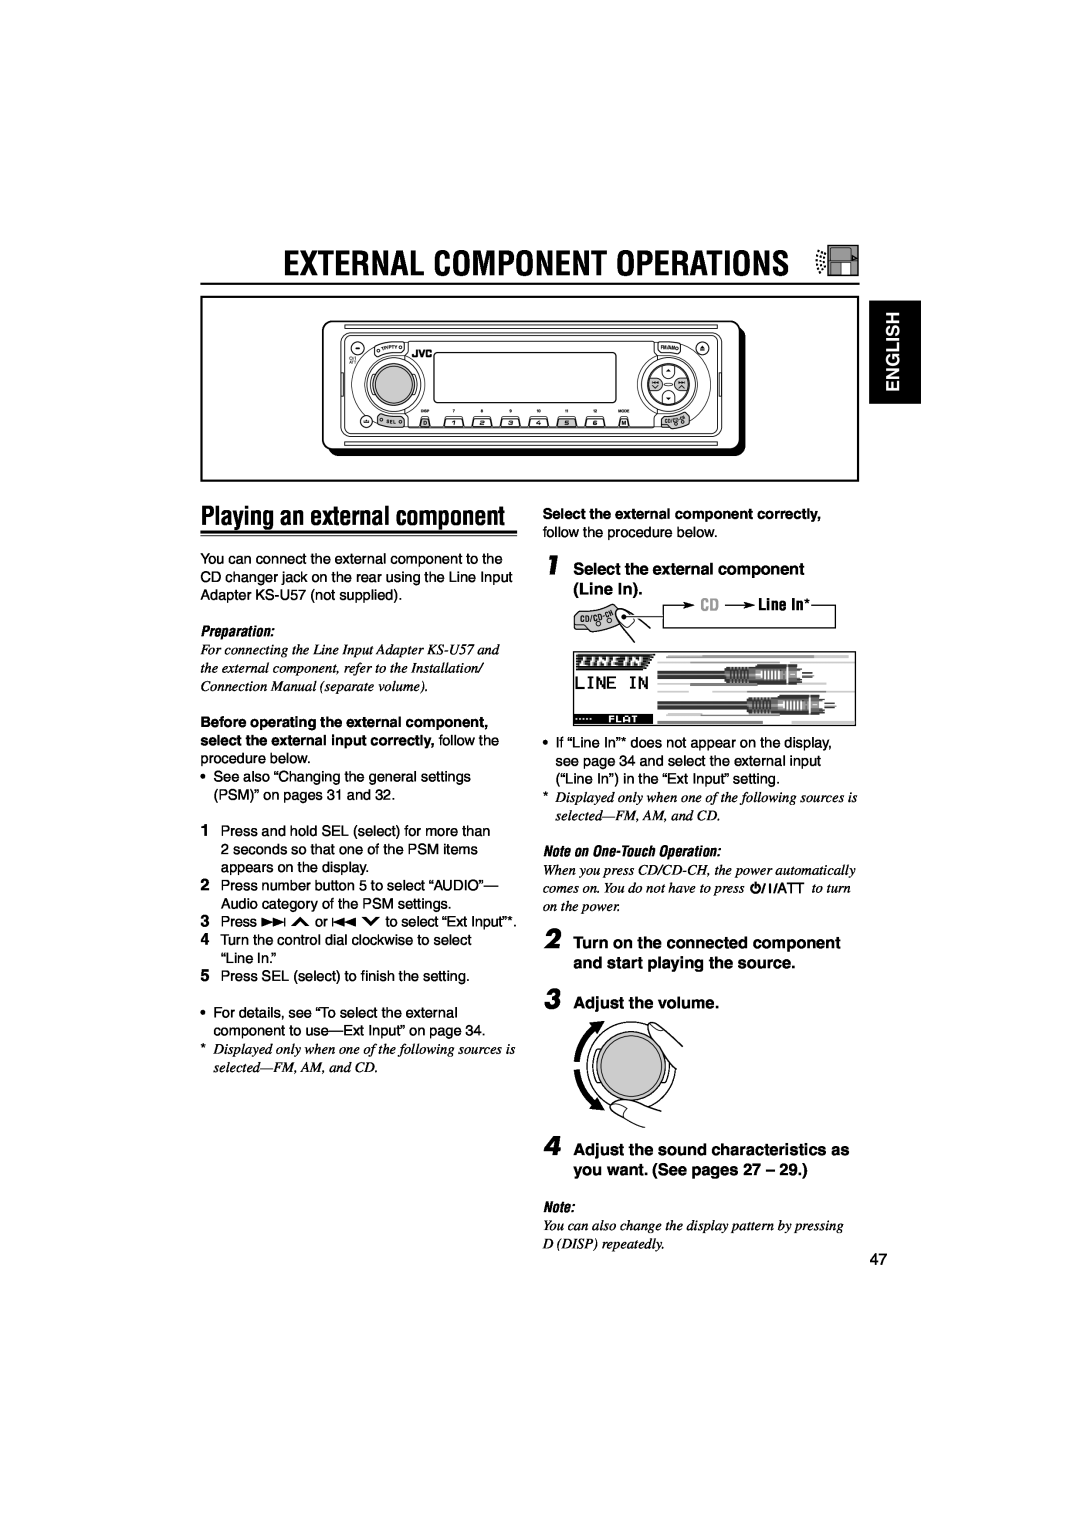 JVC KD-LH1101 External Component Operations, Playing an external component, English, Select the external component Line In 